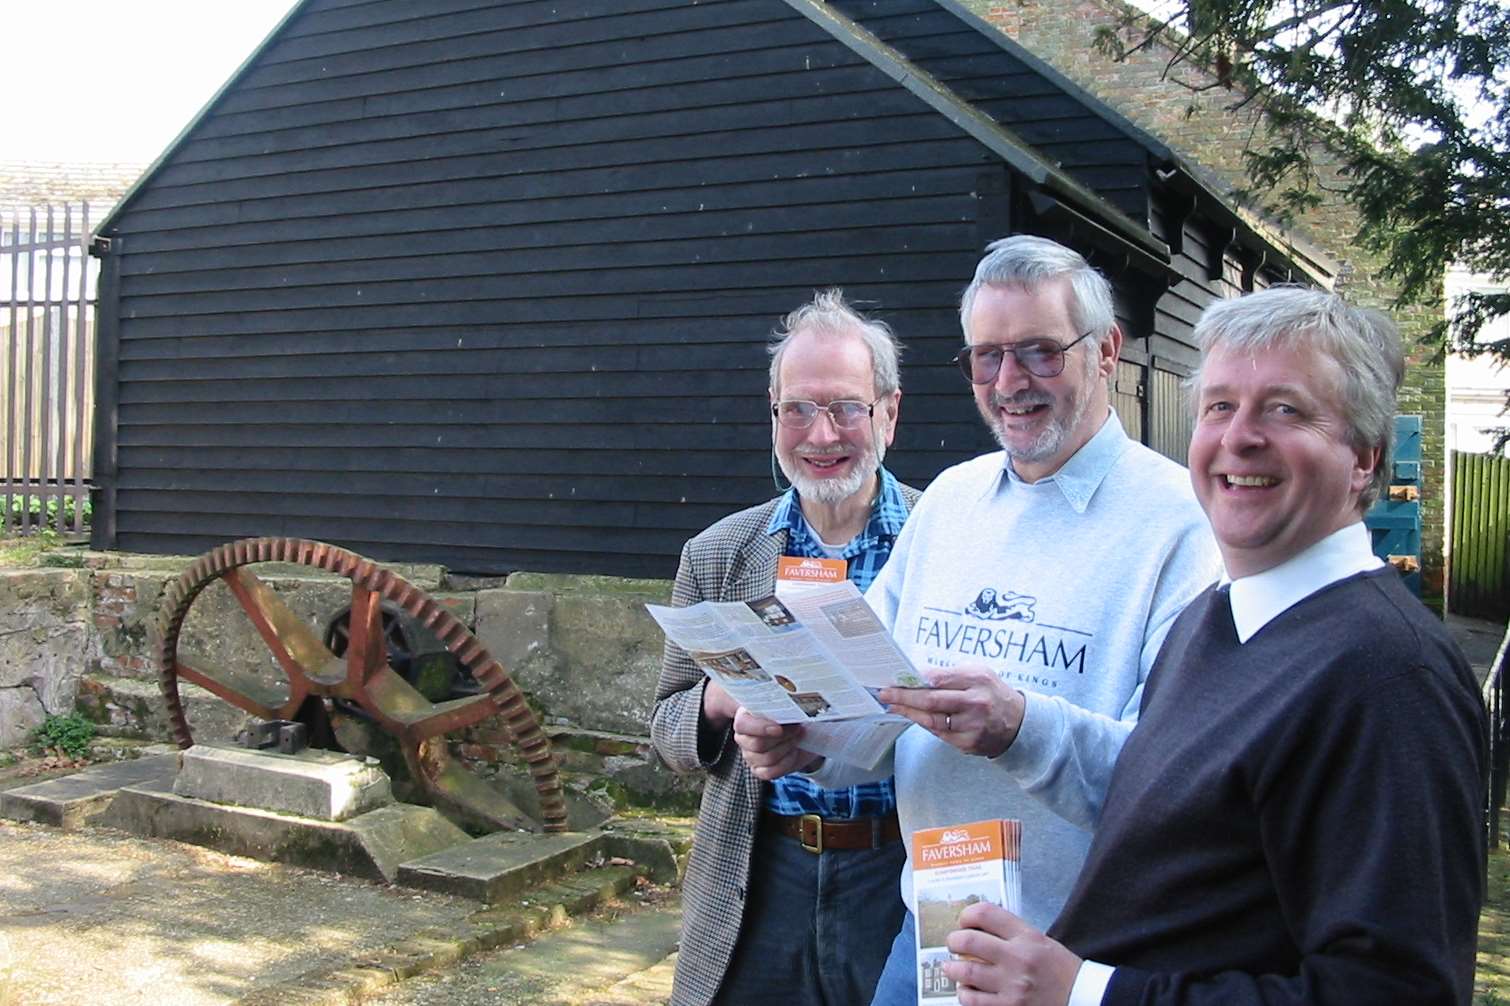 Arthur with Peter Faulkner and Laurence Young, celebrating the launch of Faversham's new gunpowder trail leaflet in 2003.